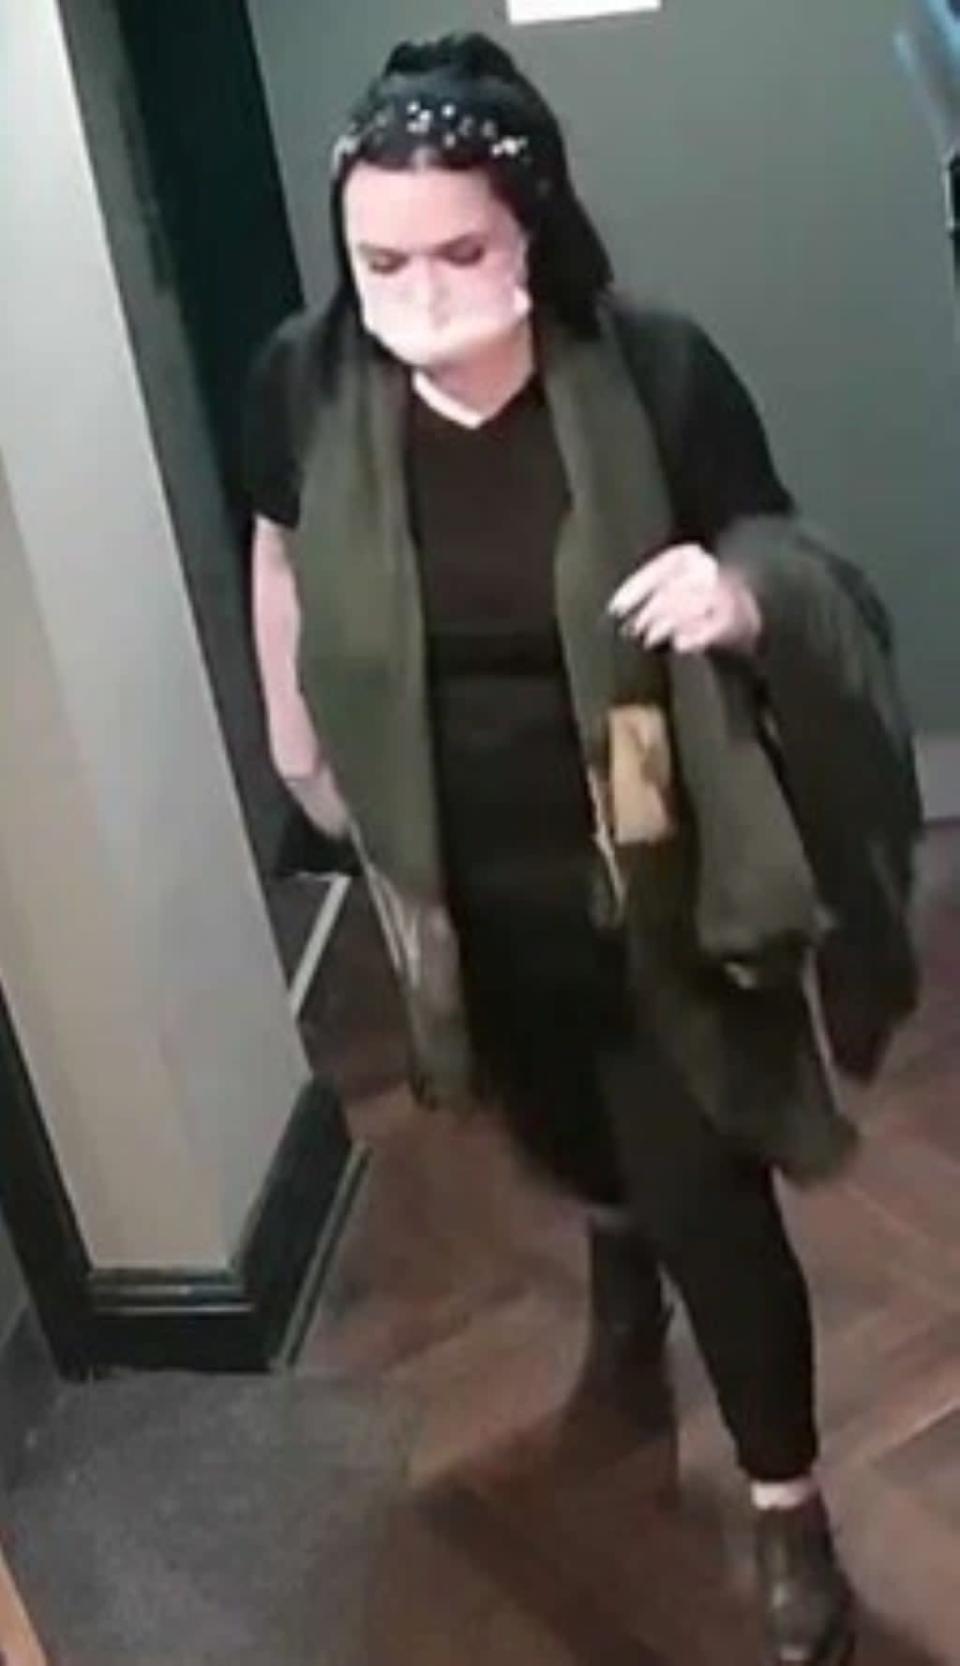 Alice Byrne in a CCTV image wearing similar clothes to which she was last seen wearing, black top and jeans, however it is believed she was wearing a white pair of training shoes. (Photo Lothian and Borders Police)